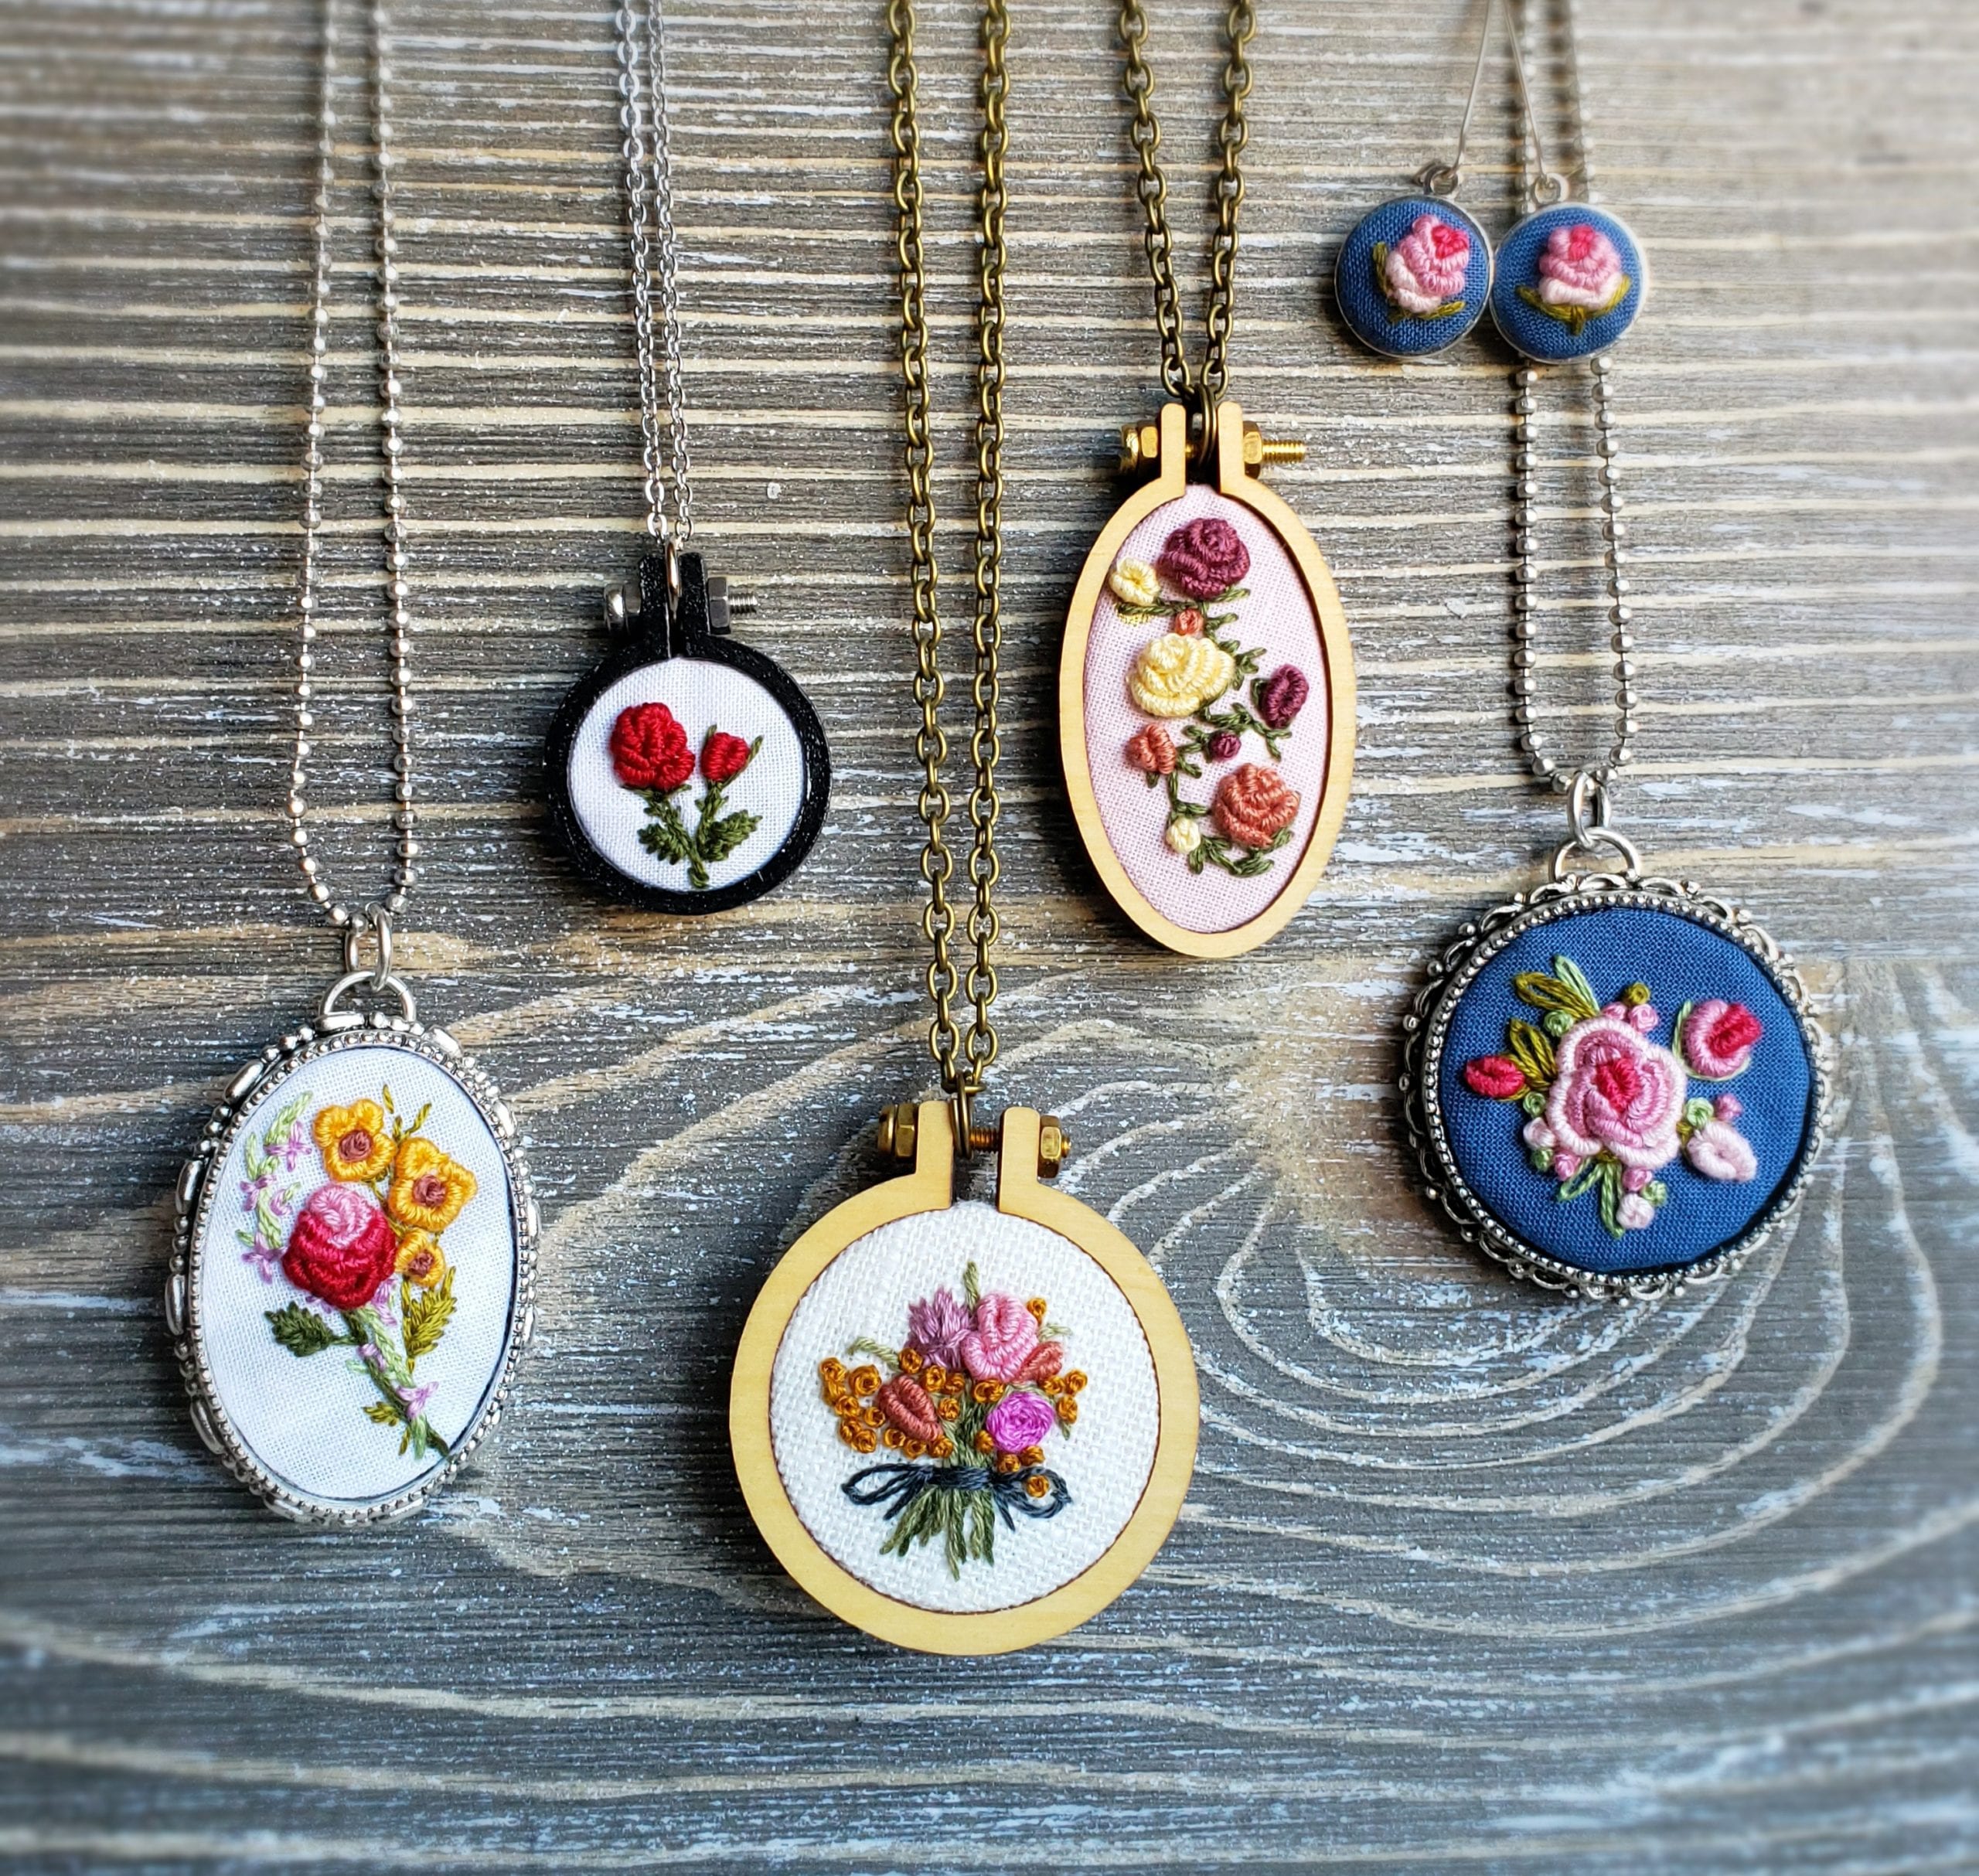 Necklaces from Pretty in Shop